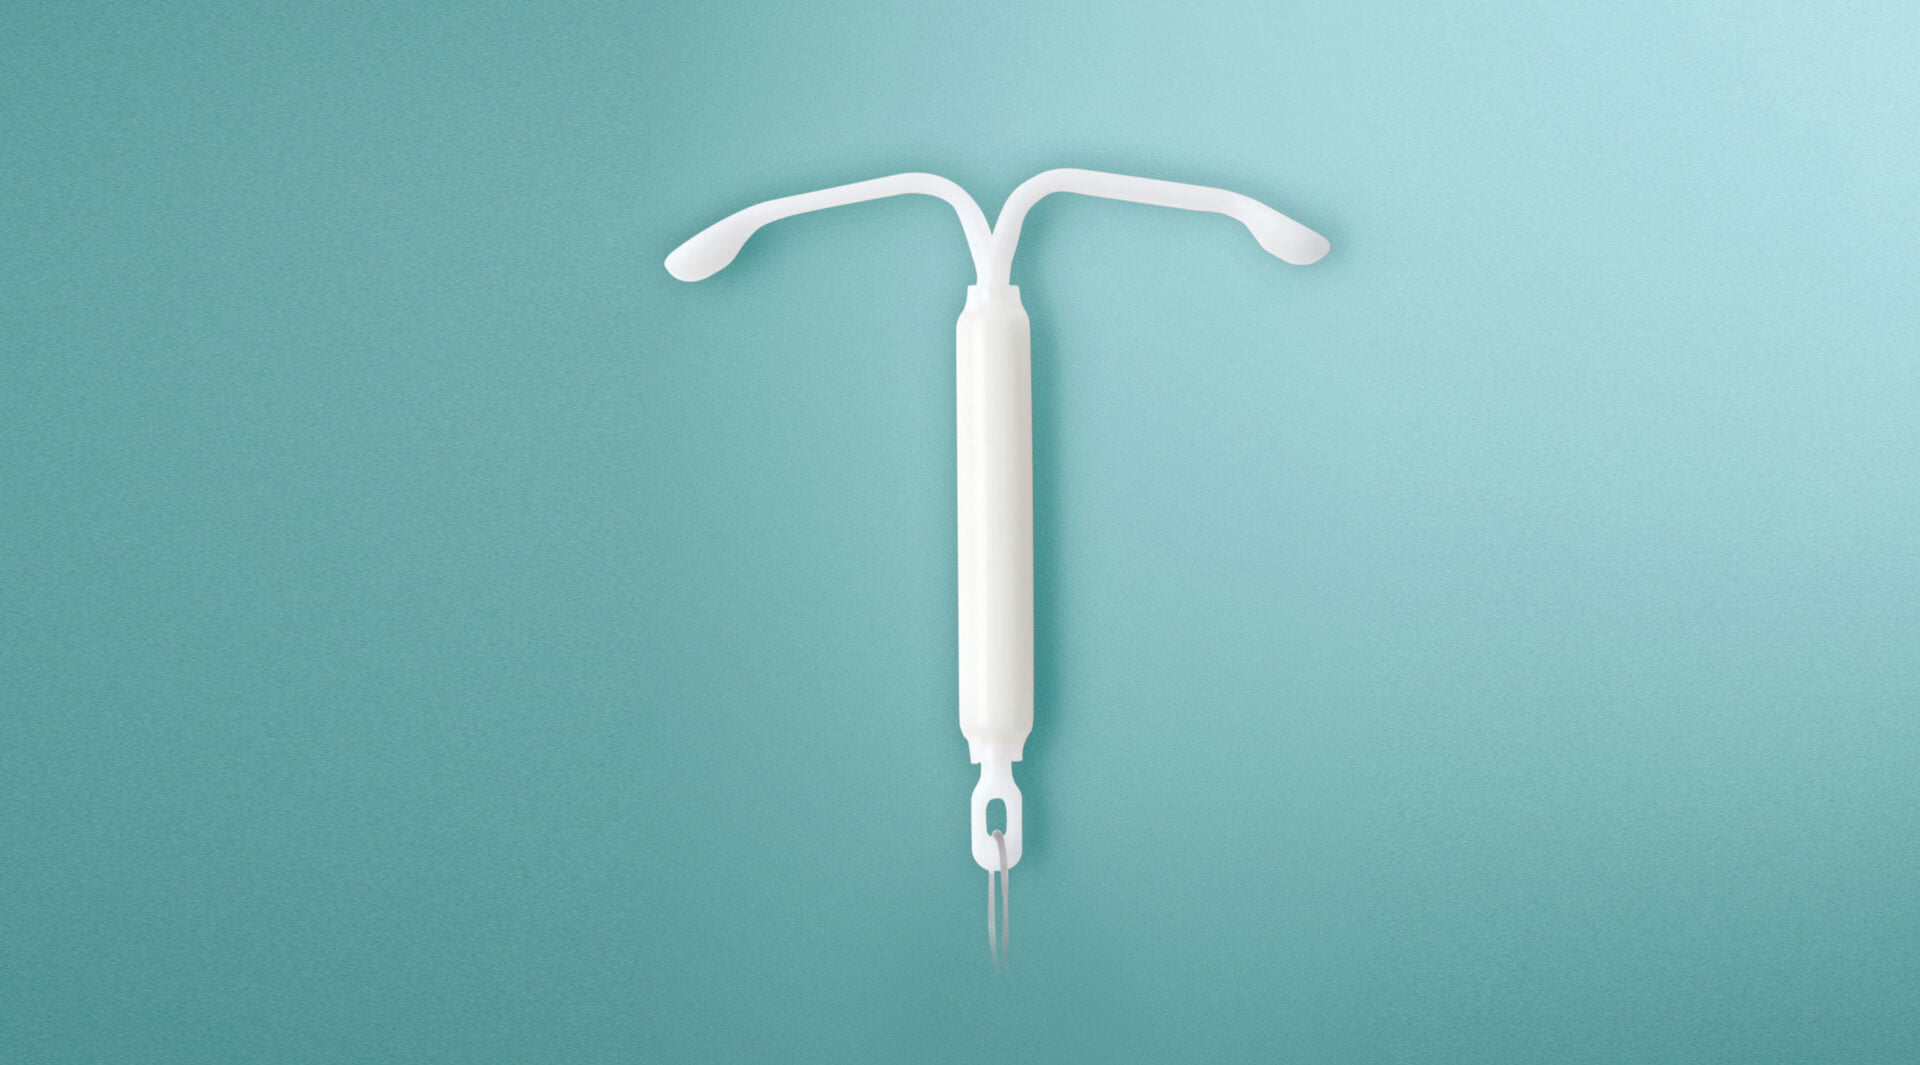 Image of a Kyleena Contraceptive implant on a green background